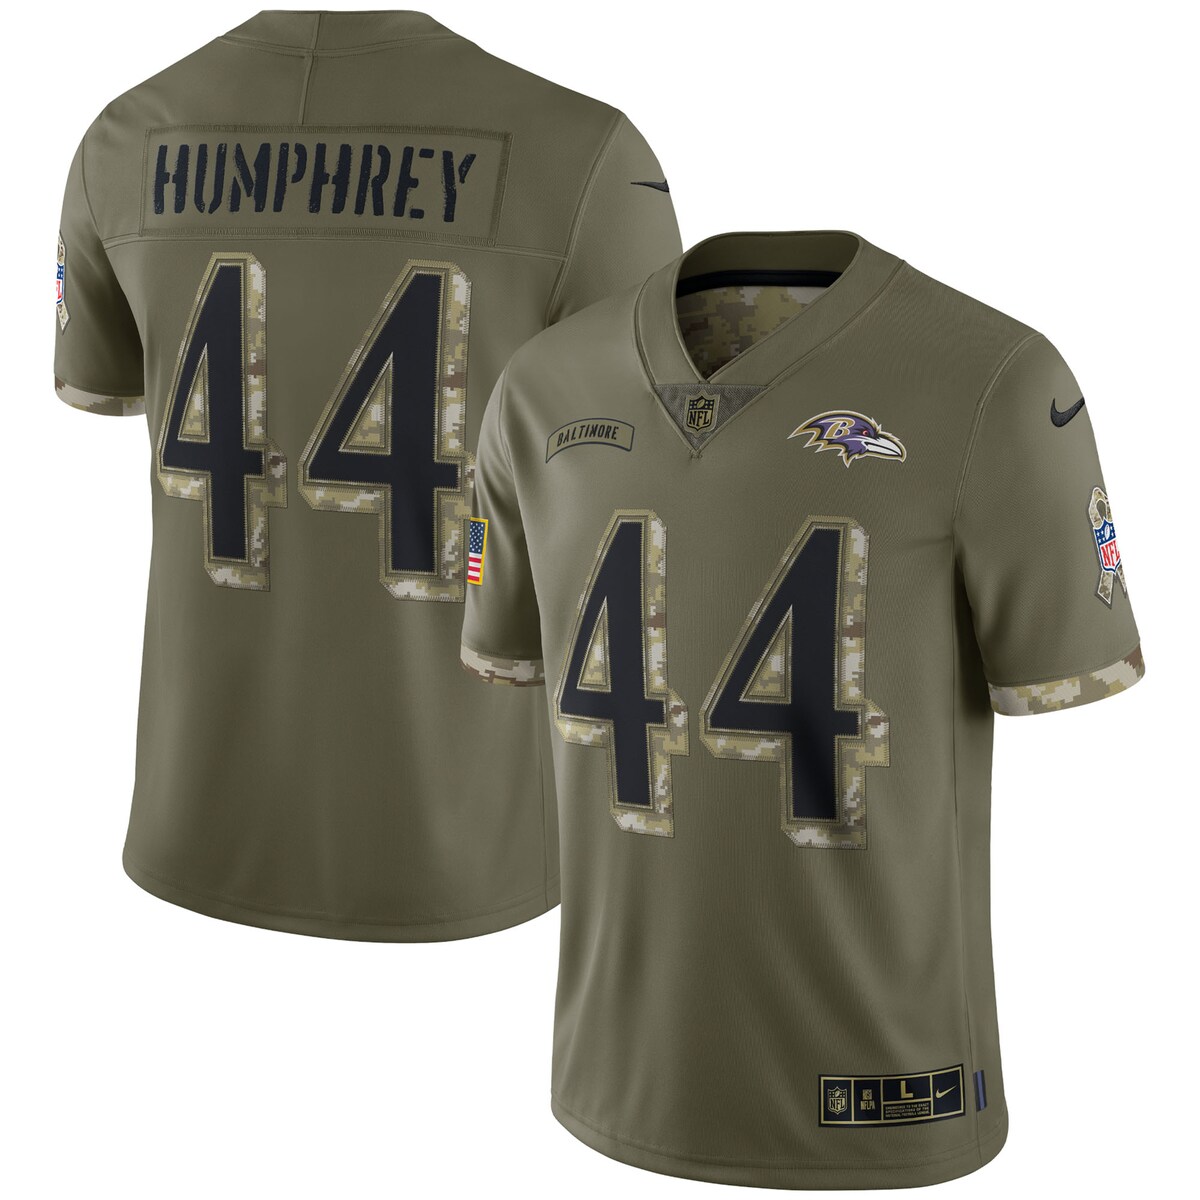 Marlon Humphrey #44  Baltimore Ravens  Olive 2022 Salute To Service Limited Jersey